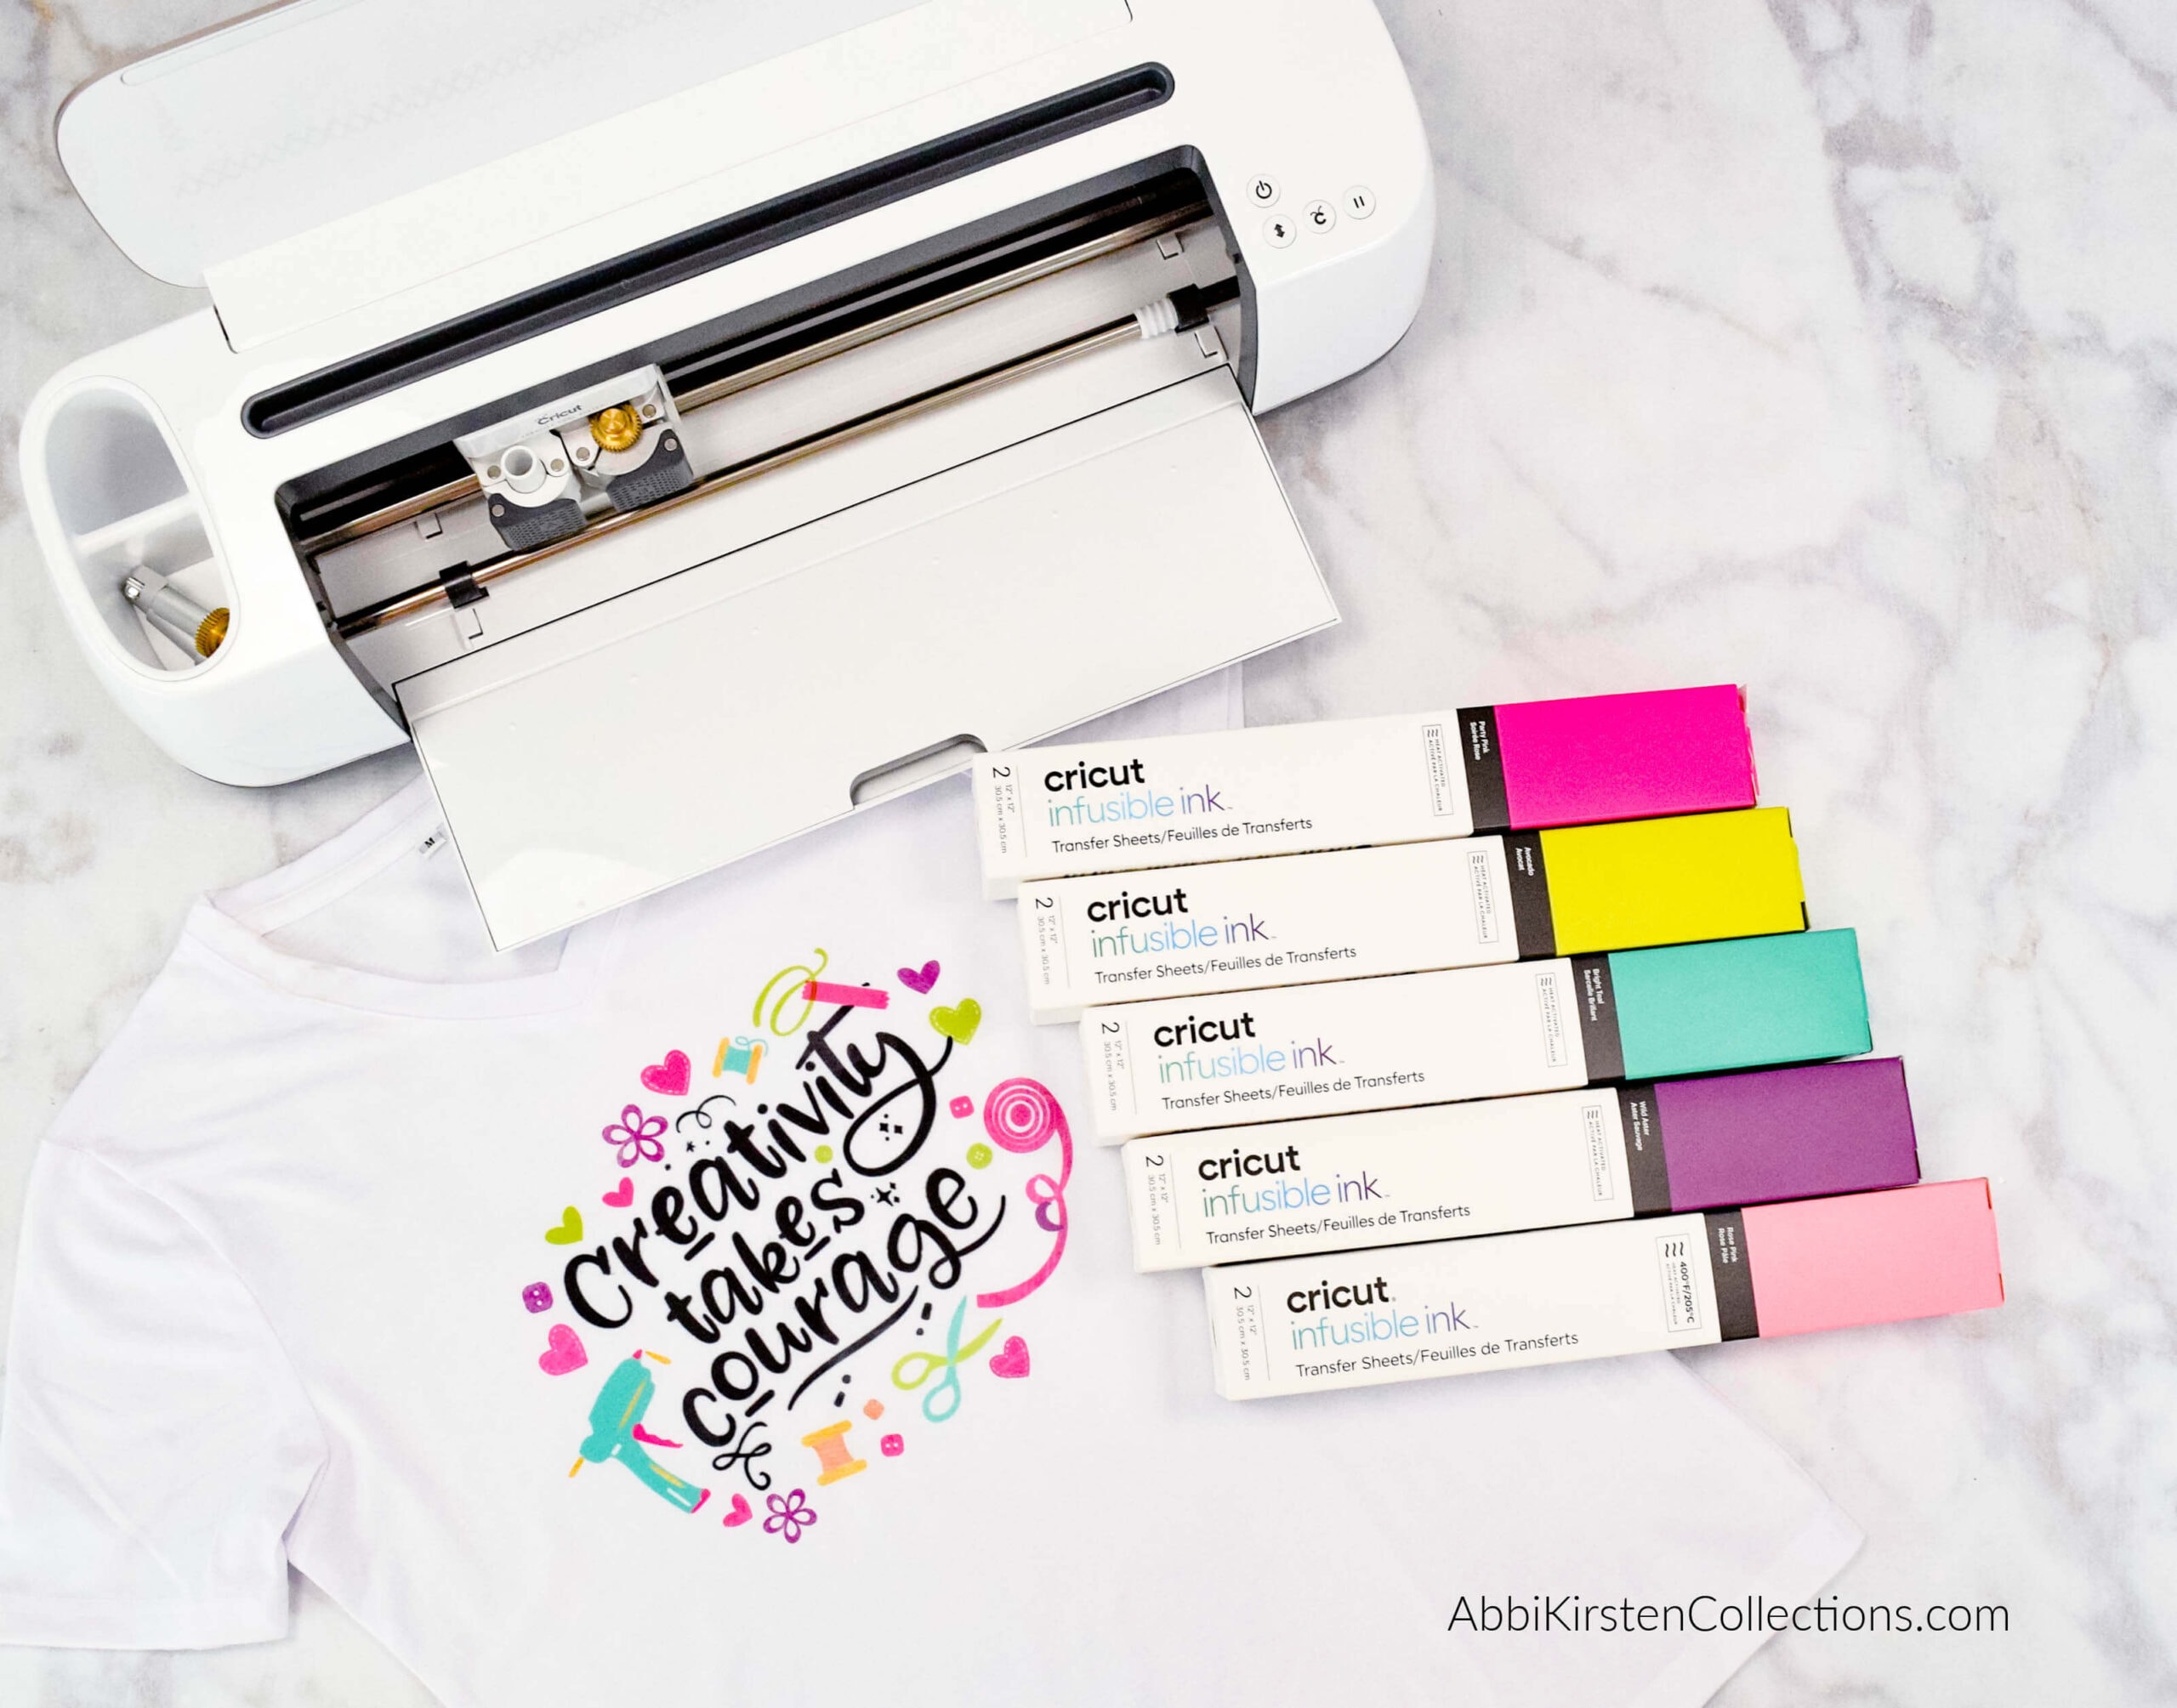 Cricut Accessories And Supplies - The Most Useful - Printable Crush